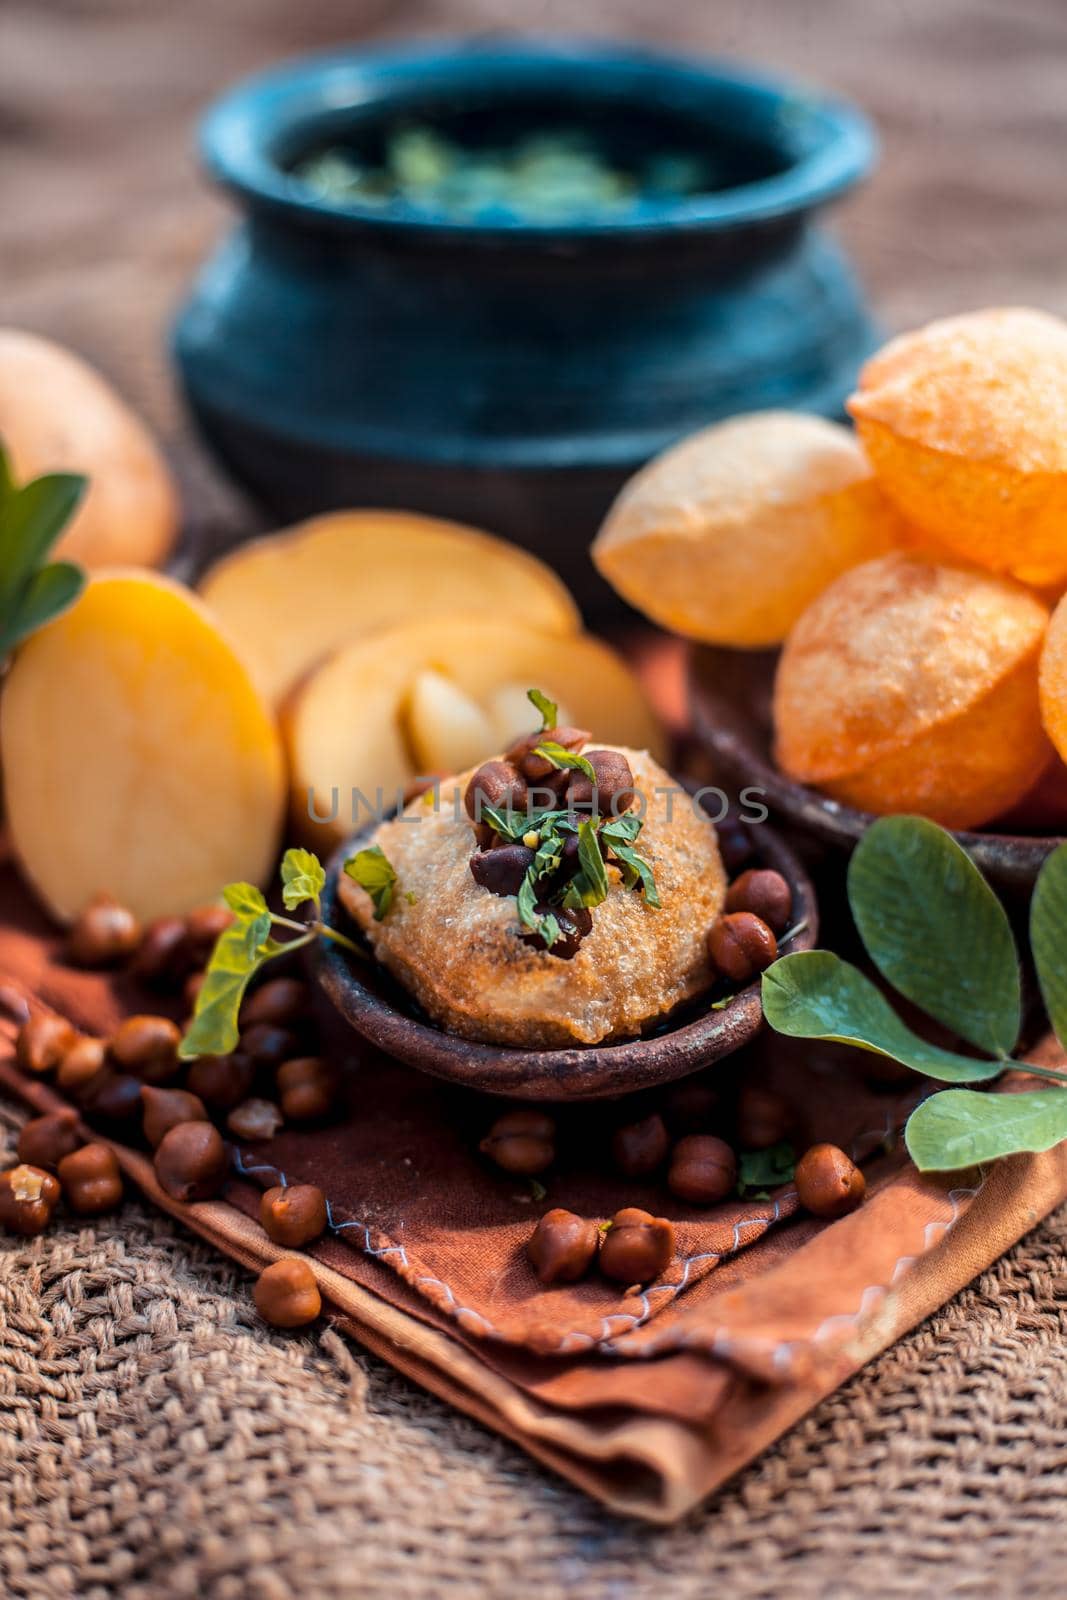 Famous Indian & Asian street food dish i.e. Panipuri snack in a clay bowl along with its flavored spicy water in another clay vessel. Entire consisting raw ingredients present on the surface. by mirzamlk